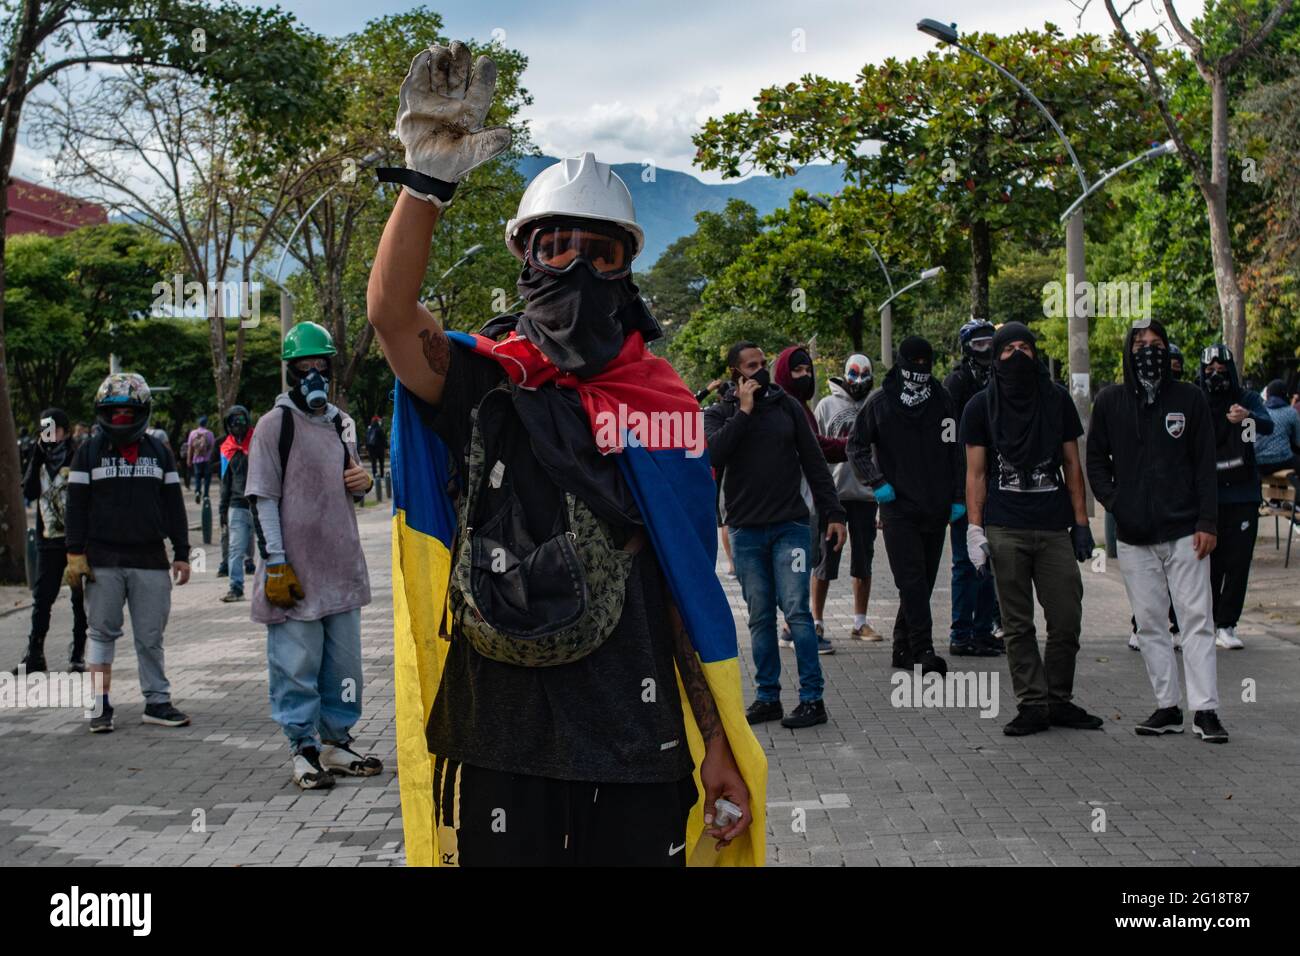 A demonstrator from the front line holds its hand up as he has a Colombia's national flag wrapped on his neck as clashes between demonstrators and Colombia's riot police (ESMAD) erupt in Medellín, Colombia after several weeks of anti-government protest against President Ivan Duque's tax and health reforms and unrest and abuse of authority cases that leave at least 70 dead according to NGOs on June 4, 2021. Stock Photo